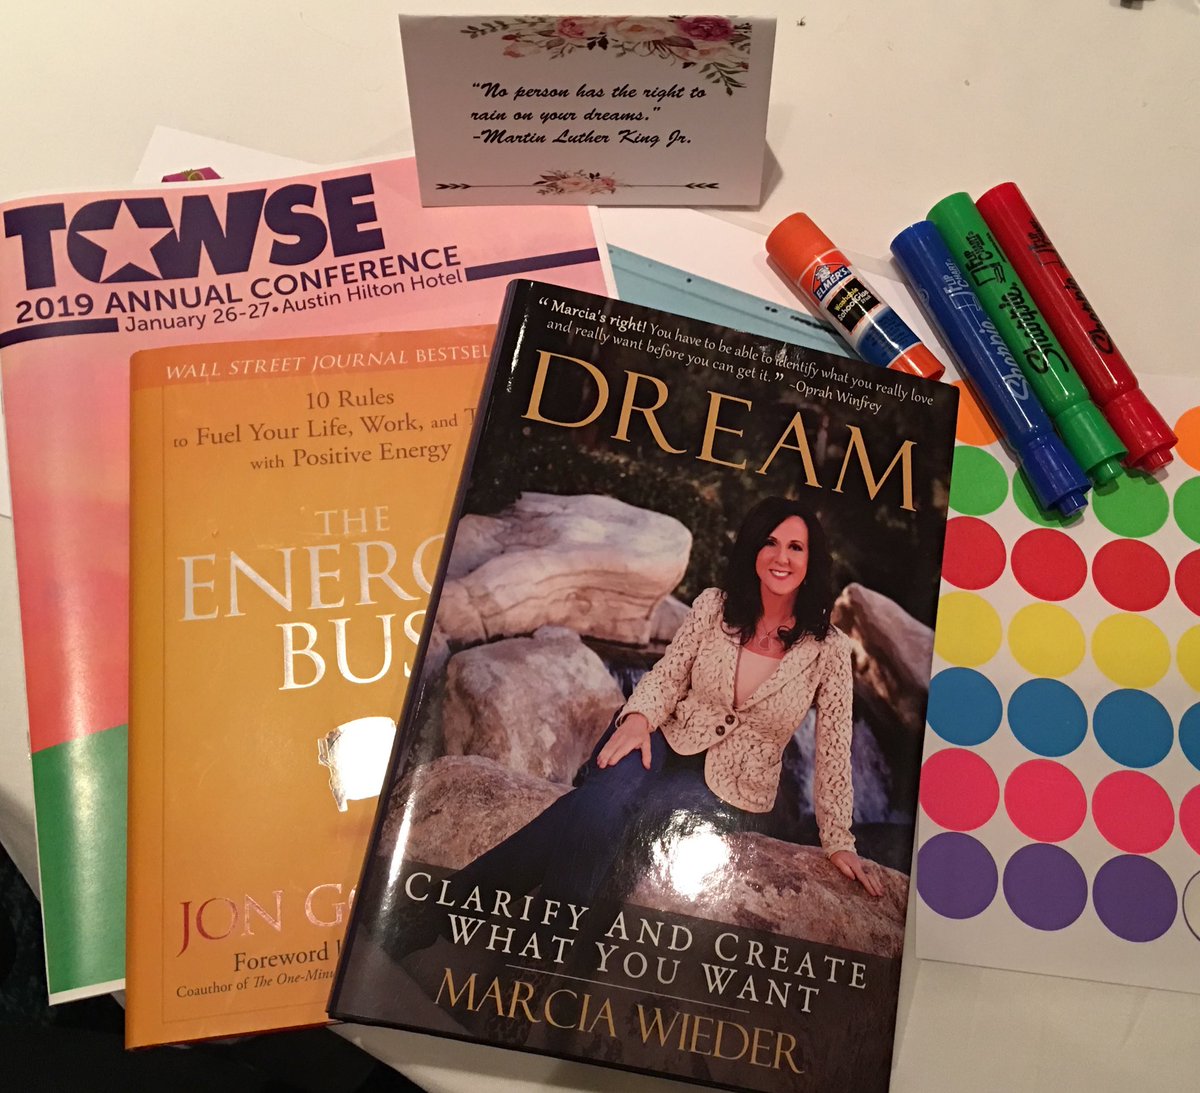 I ❤️ the phenomenal messages and the networking available at #TCWSE19! Creating & crafting who I am for the service of others. #FindingPurpose 📕🚌👩🏽‍🎓